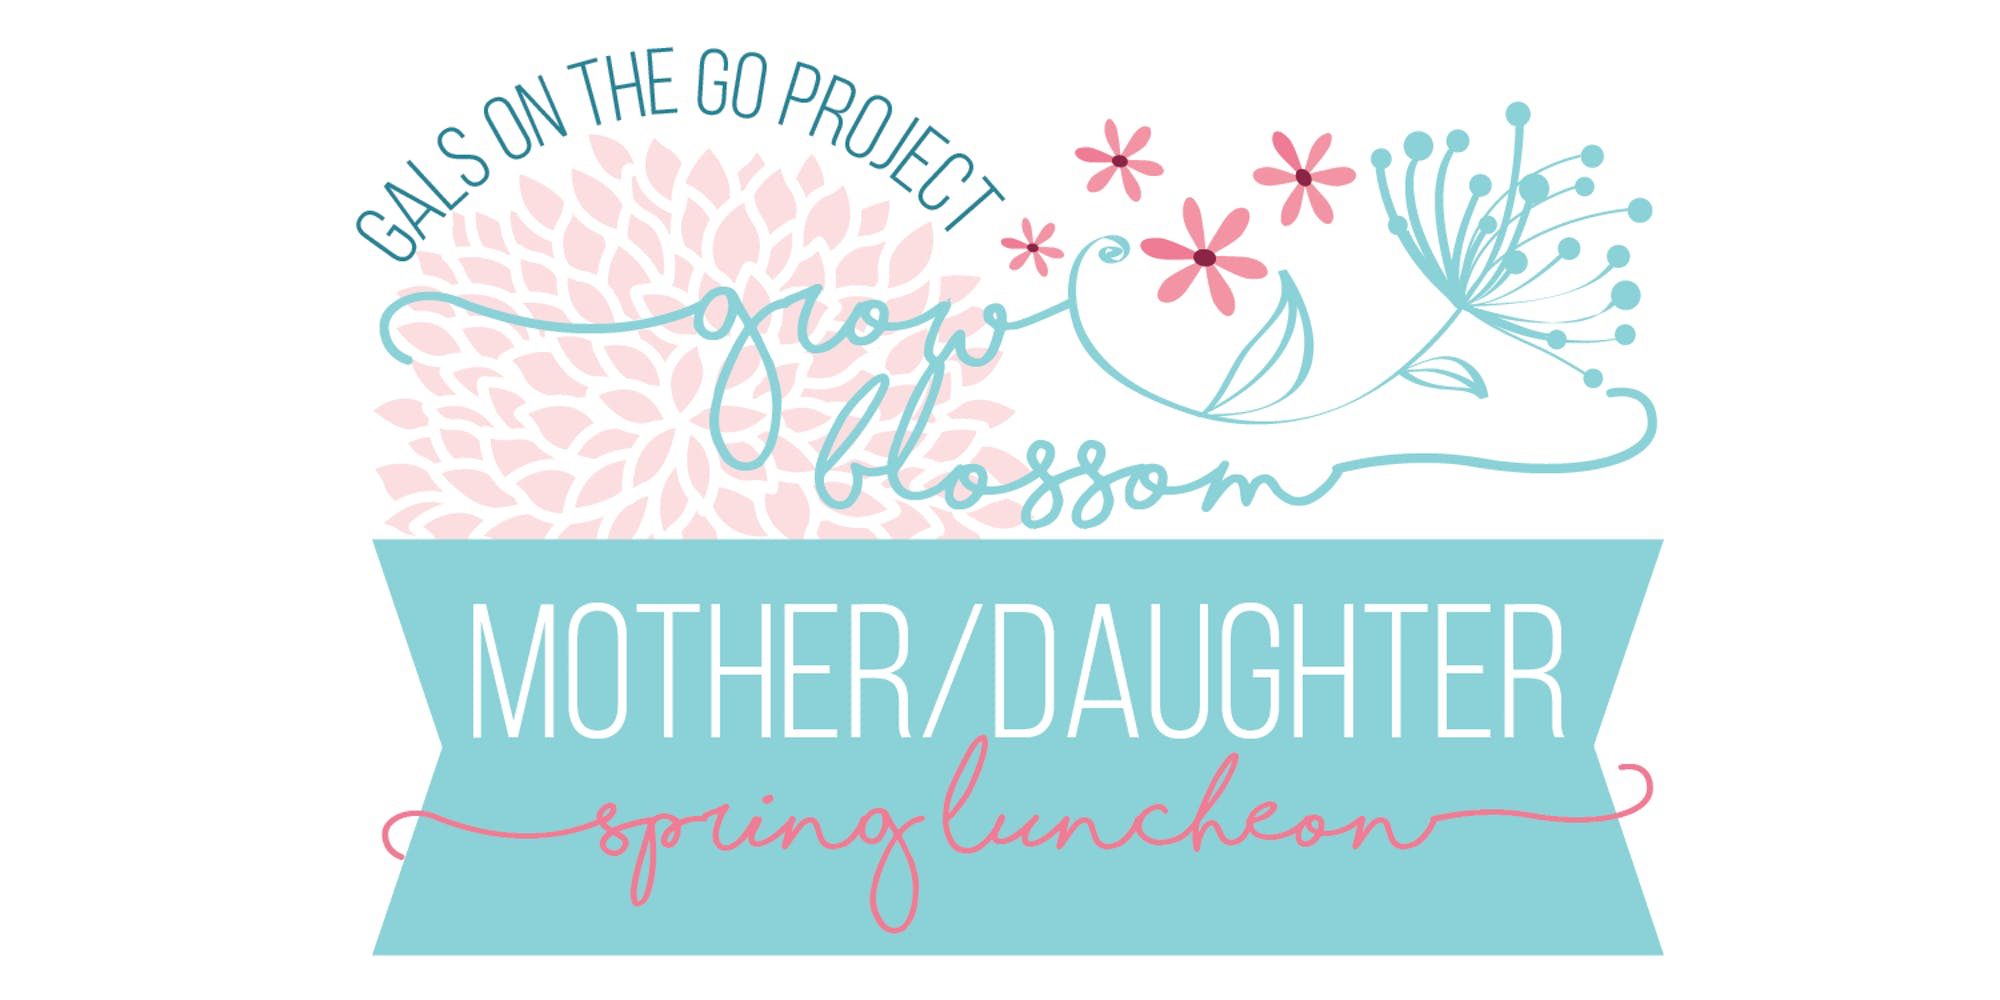 Gals on the Go Project’s Mother/Daughter Luncheon, Grow and Blossom